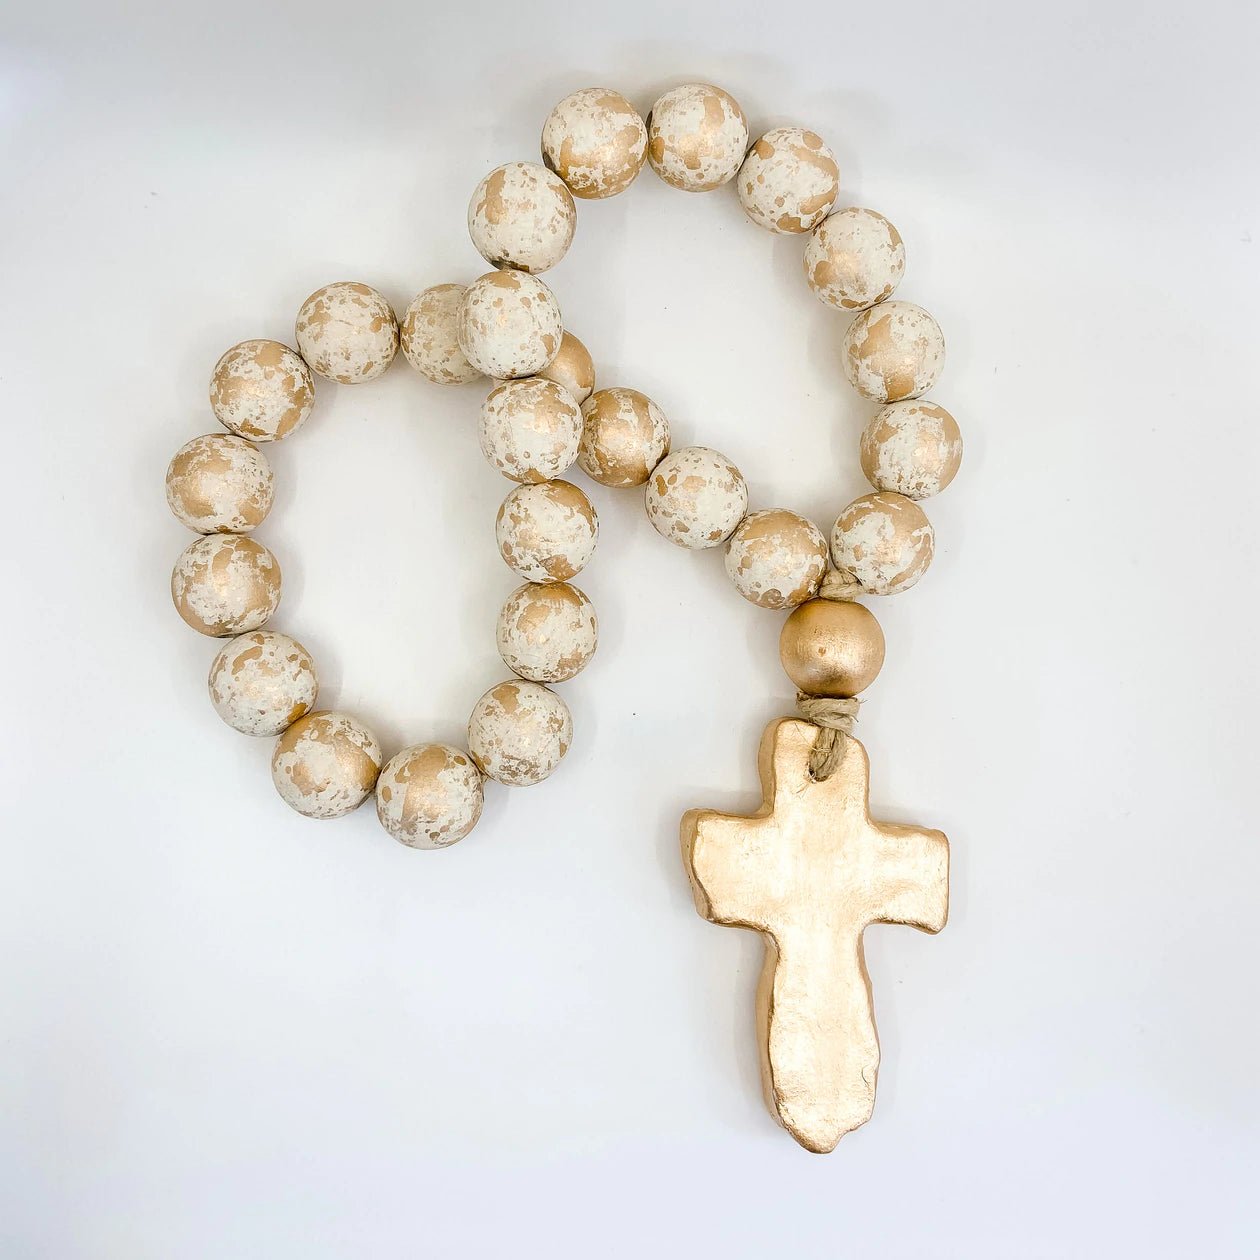 Big Blessing Beads - Cross - Gaines Jewelers